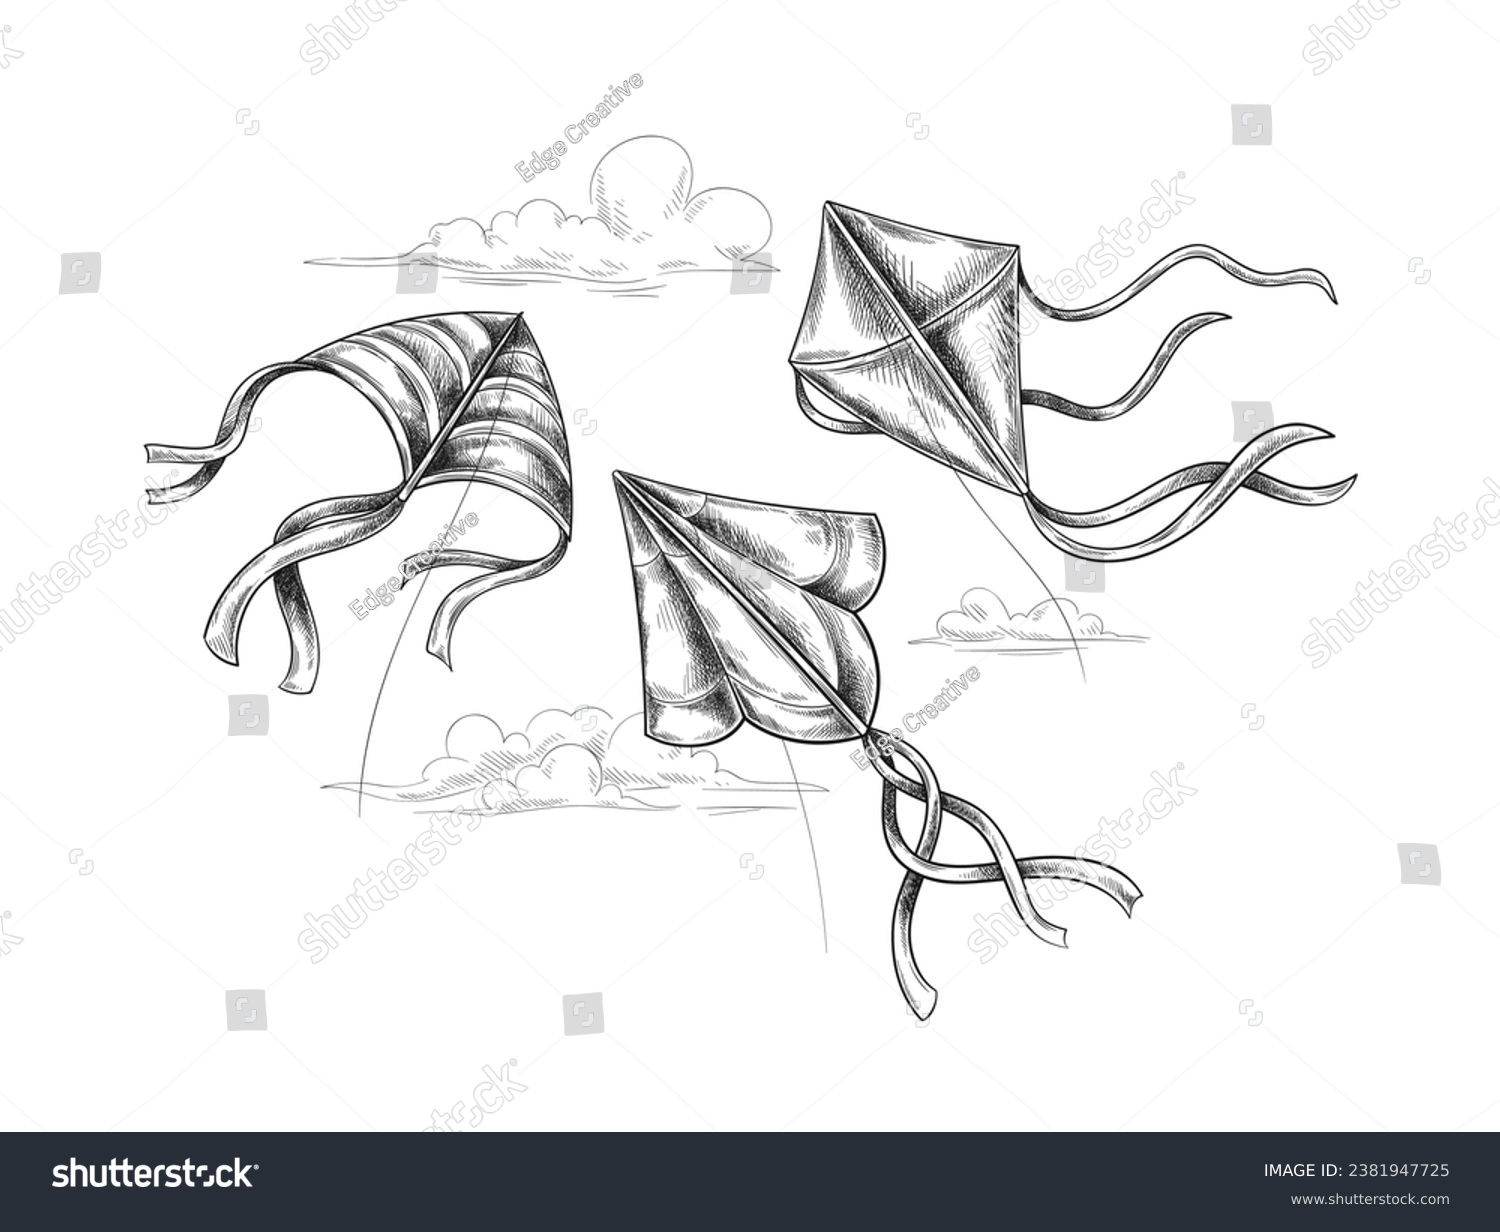 SVG of Fly kite in sky concept. Colorful toys at strings. Minimalistic creativity and art. Hand drawn sketch. Poster or banner for website. Linear flat vector illustration isolated on white background svg